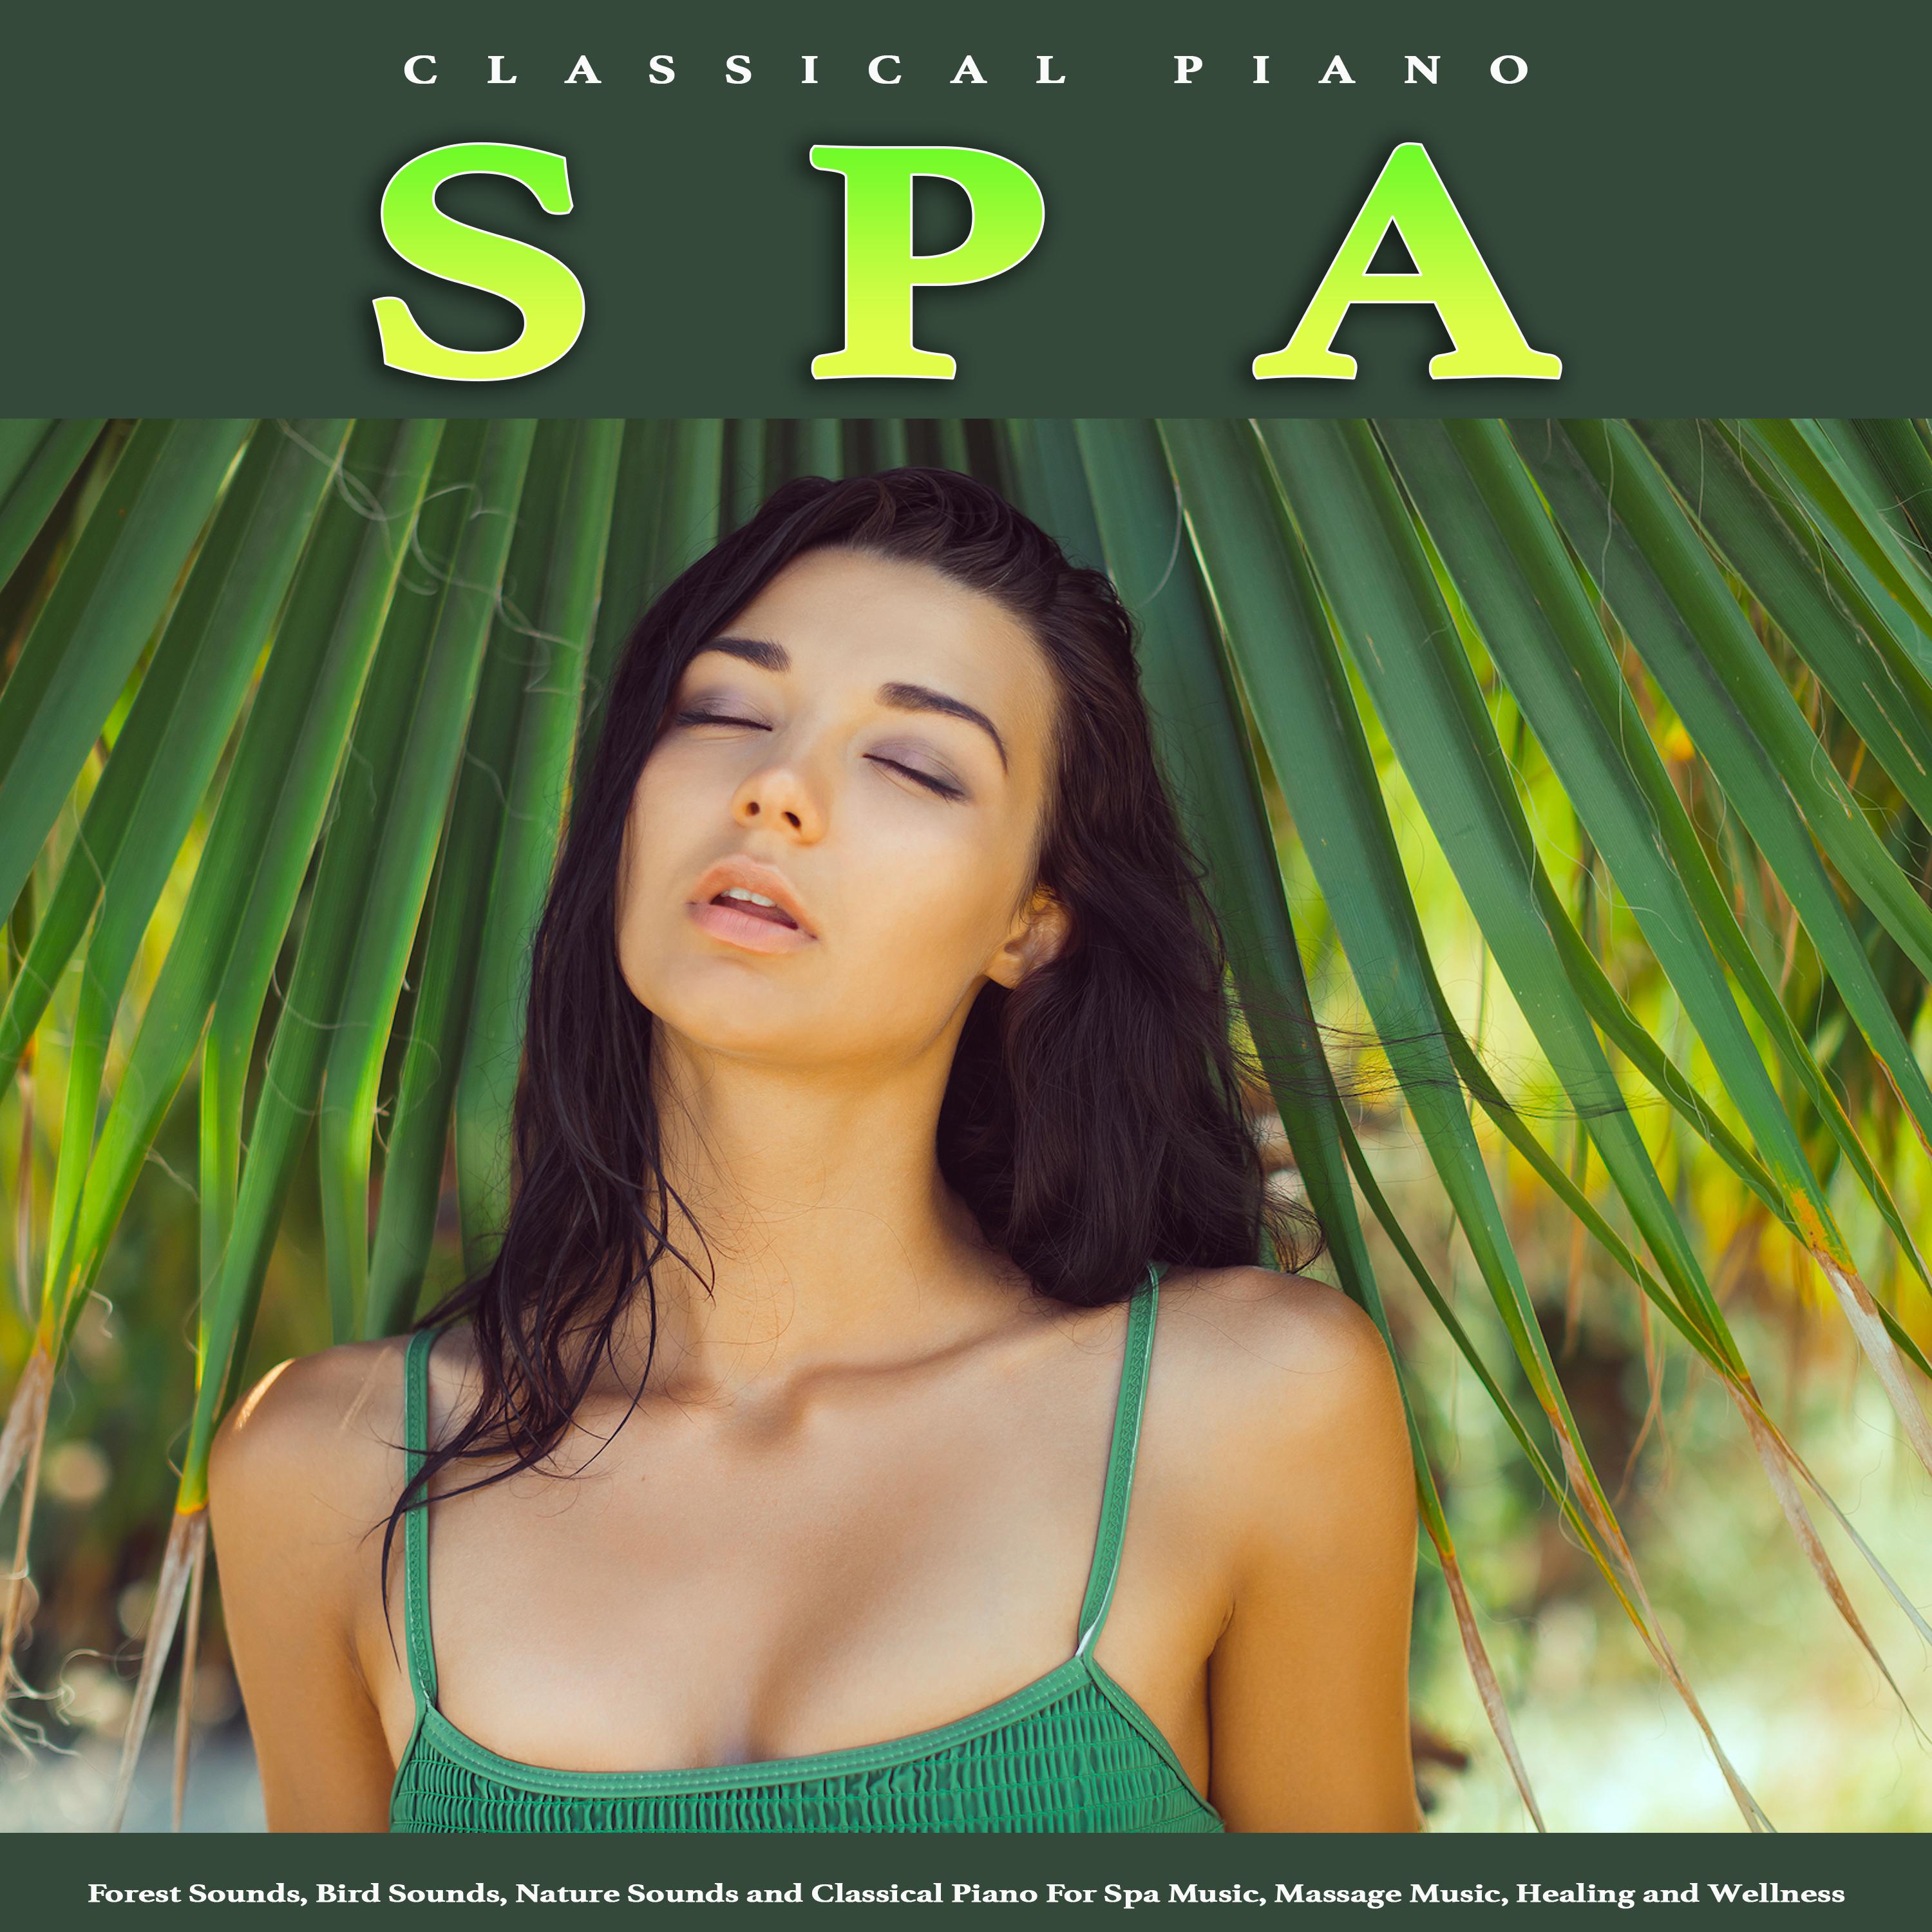 Piano Sonata - Mozart - Spa Music For Spa - Massage Music - Classical Piano and Nature Sounds For Spa